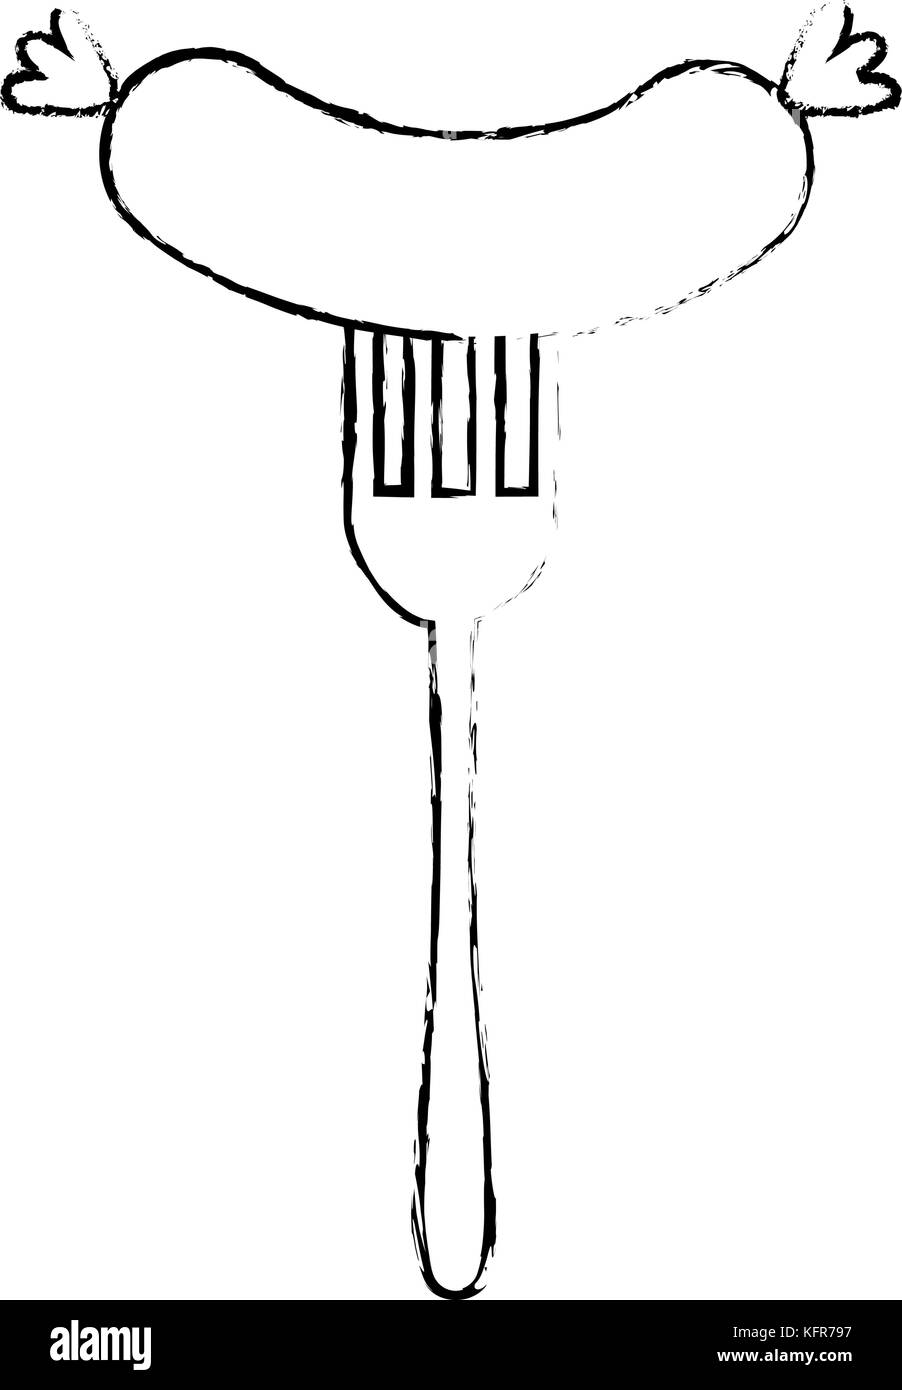 fork with delicious sausage vector illustration design Stock Vector